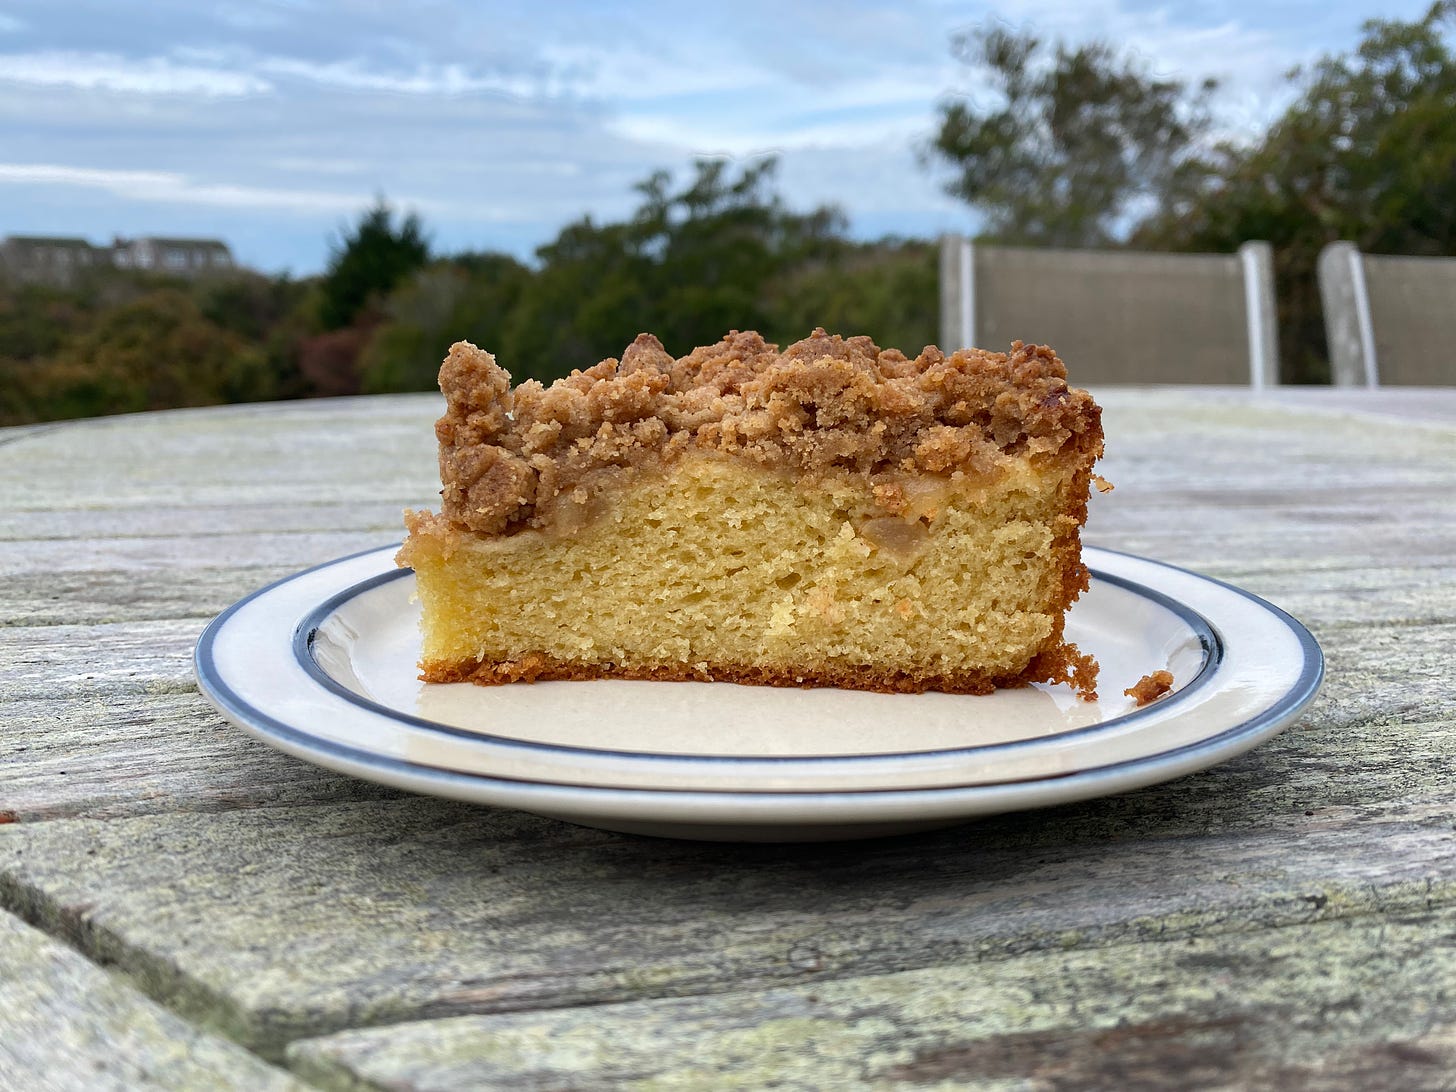 A tall slice of cake, topped with pear slivers and a brown sugar crumble, sitting on a plate on an outdoor table.